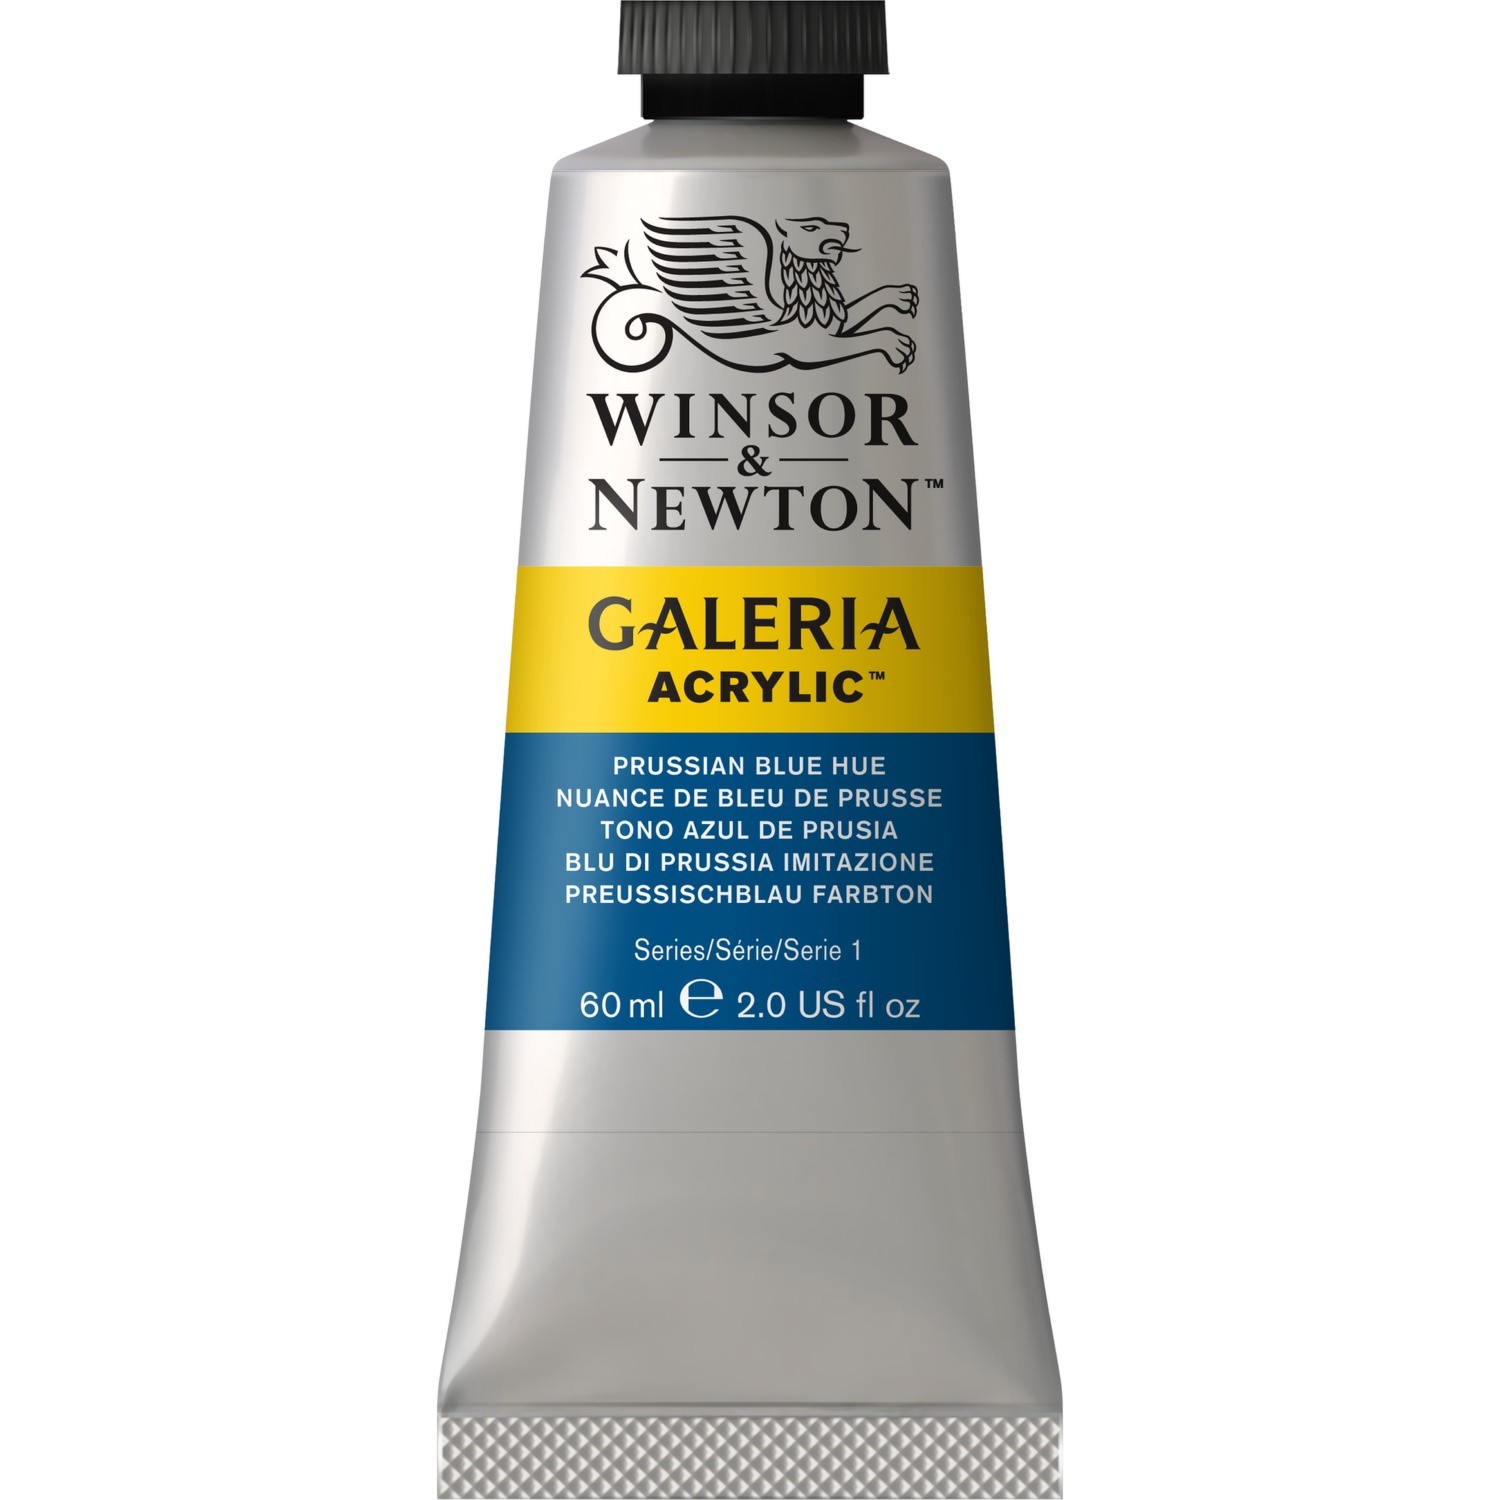 Winsor and Newton 60ml Galeria Acrylic Paint - Prussian Blue Hue Image 1